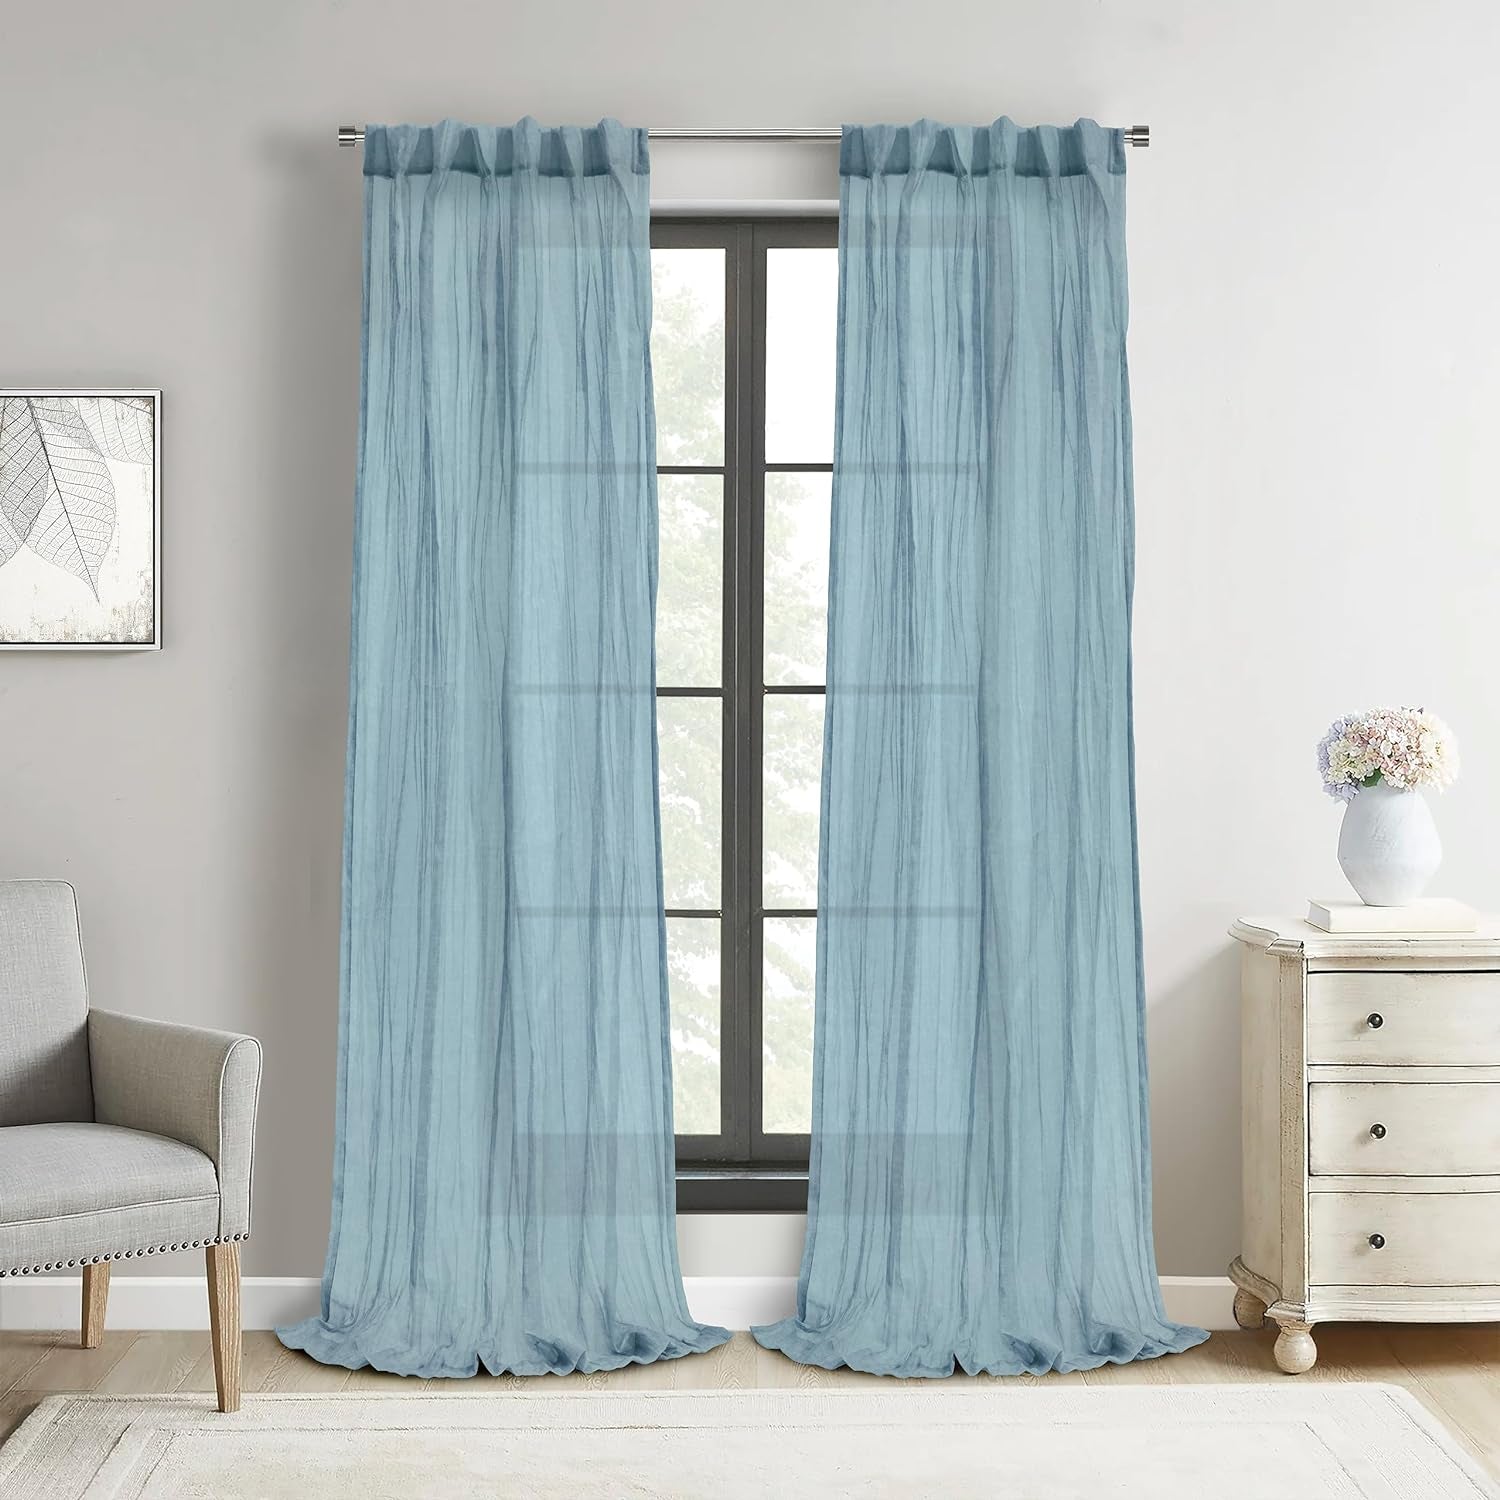 Richmark International Paloma Sheer Dual Header Curtain Panel 52 X 95 in Apricot  Commonwealth Home Fashions Blue 52" X 108" 